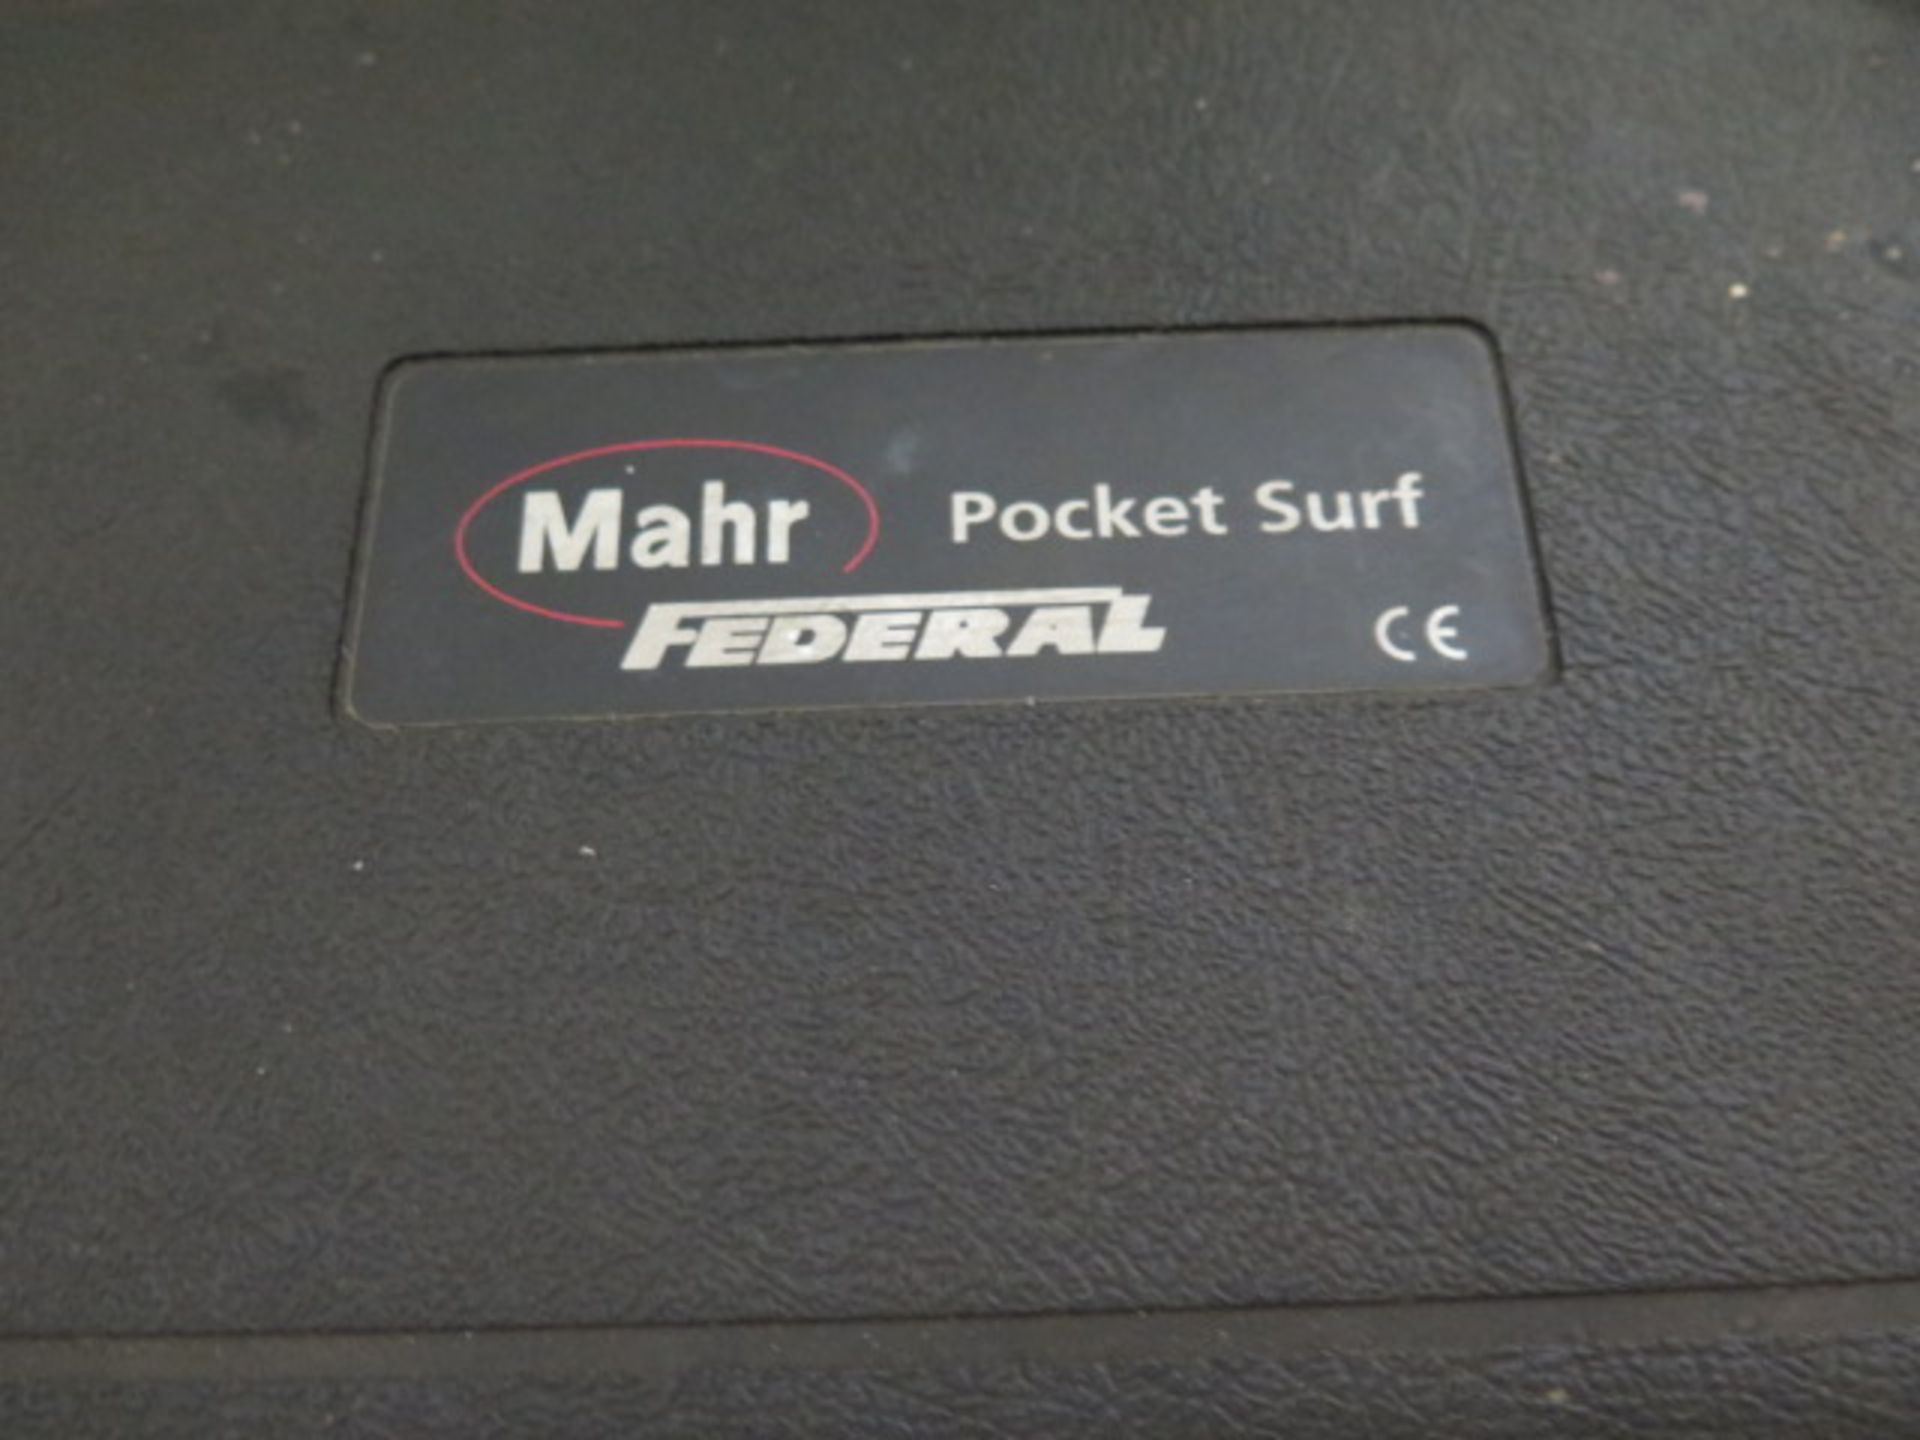 Mahr Federal Pocket Surf Surface Roughness Gage - Image 4 of 4